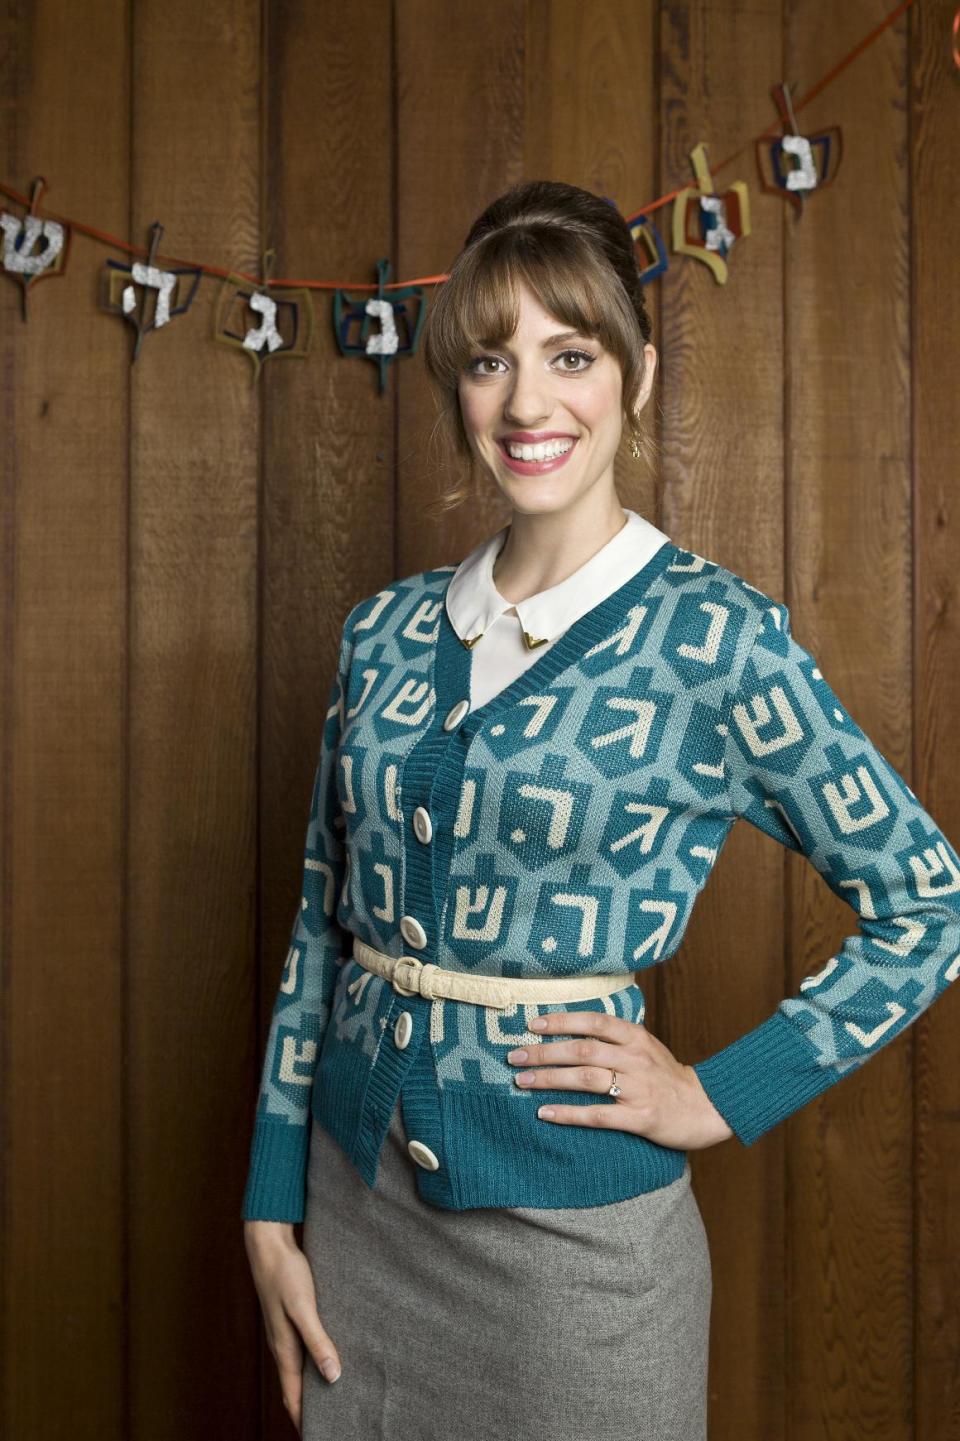 This product image released by GeltFiend.com shows a holiday sweater decorated in a menorah print. (AP Photo/GeltFiend.com)